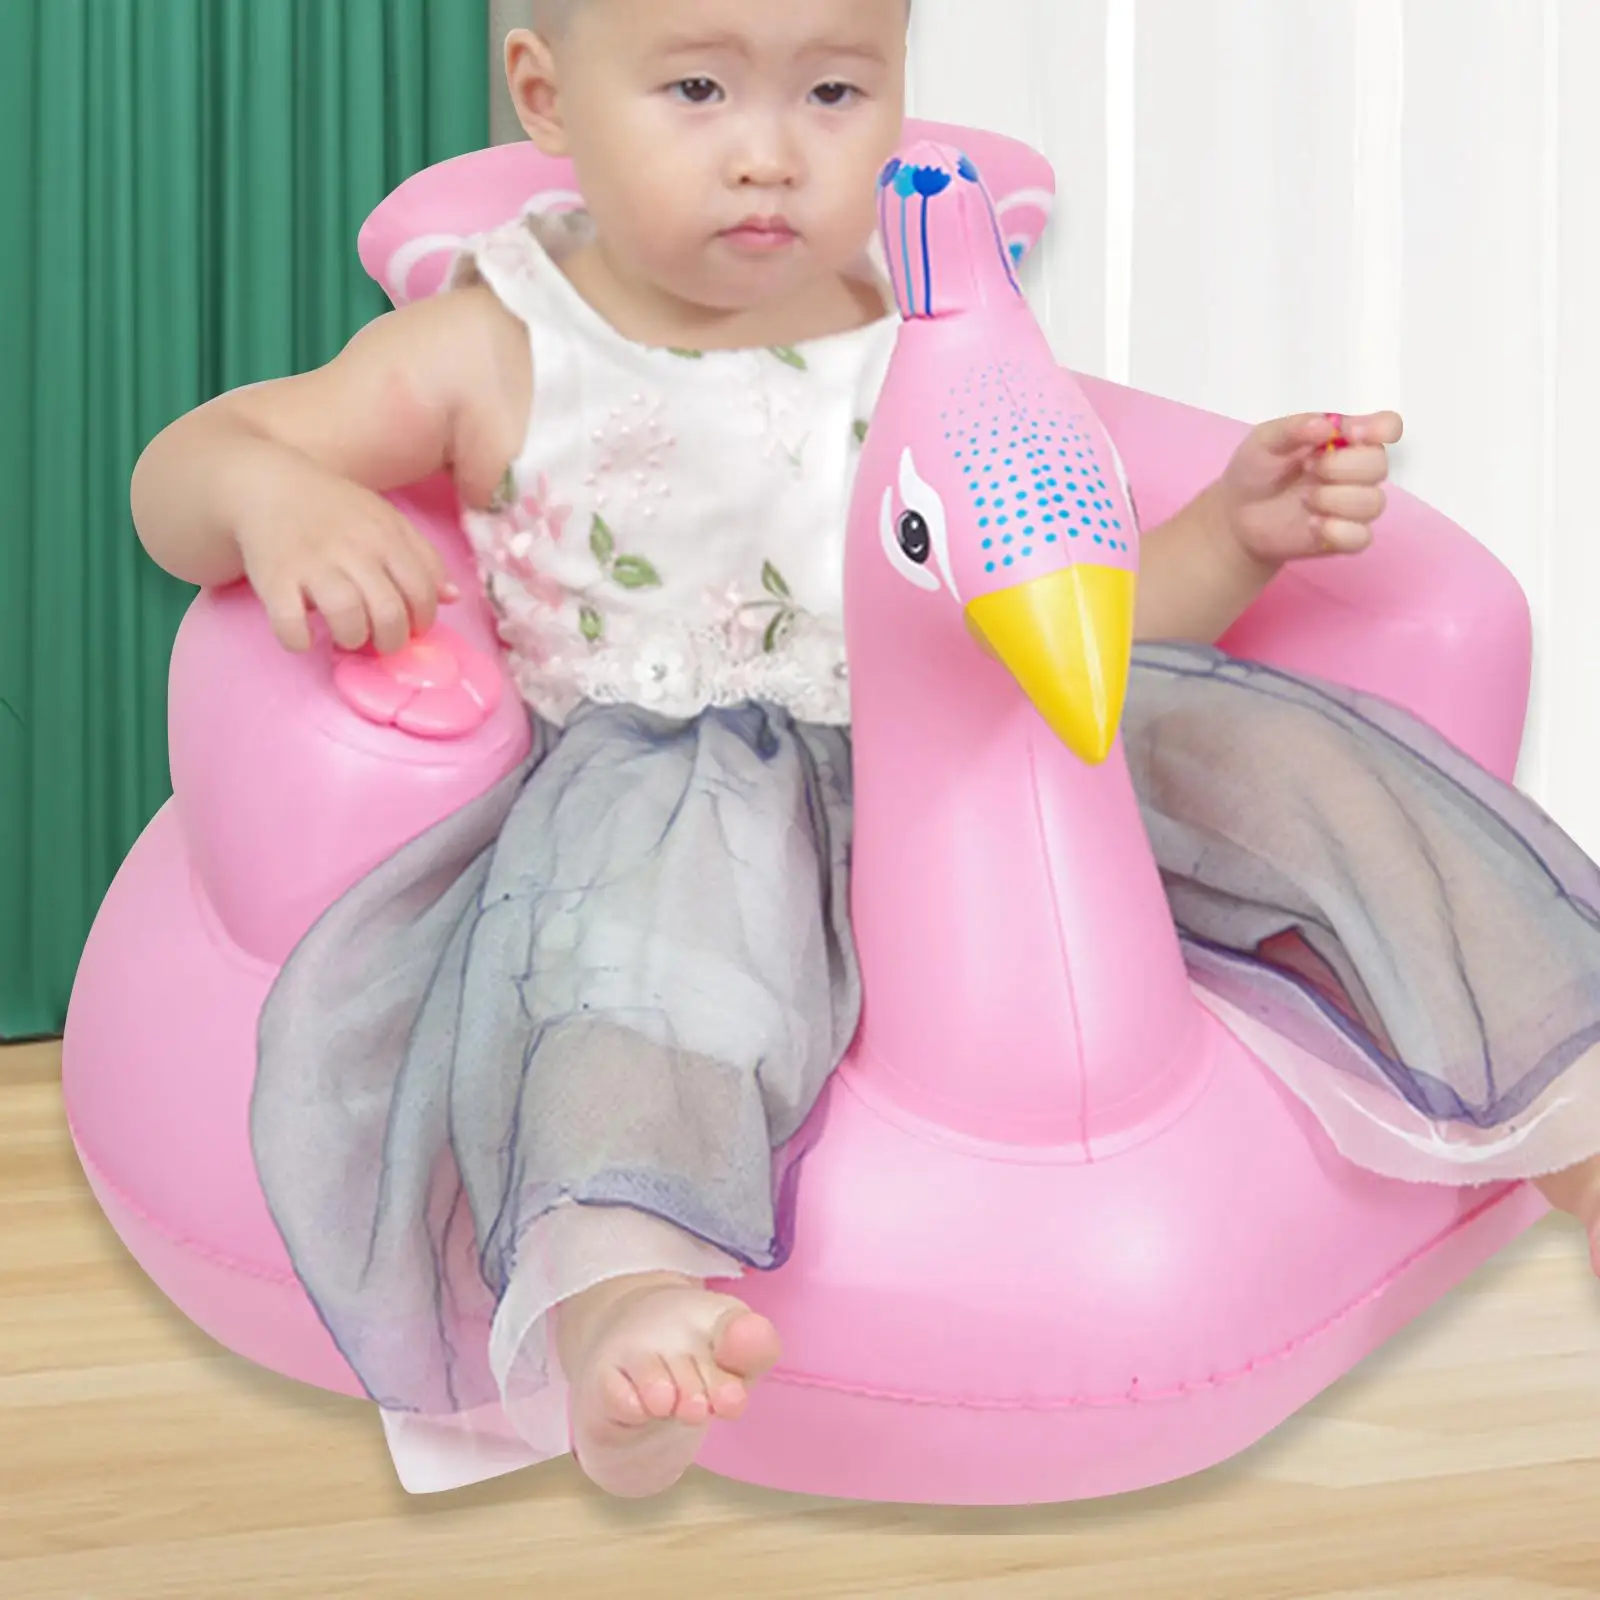 Inflation Baby Chair Seat Pool Water Toy 3 Months and up Infant Support Seat Playing Game toy Inflatable Seat for Babies